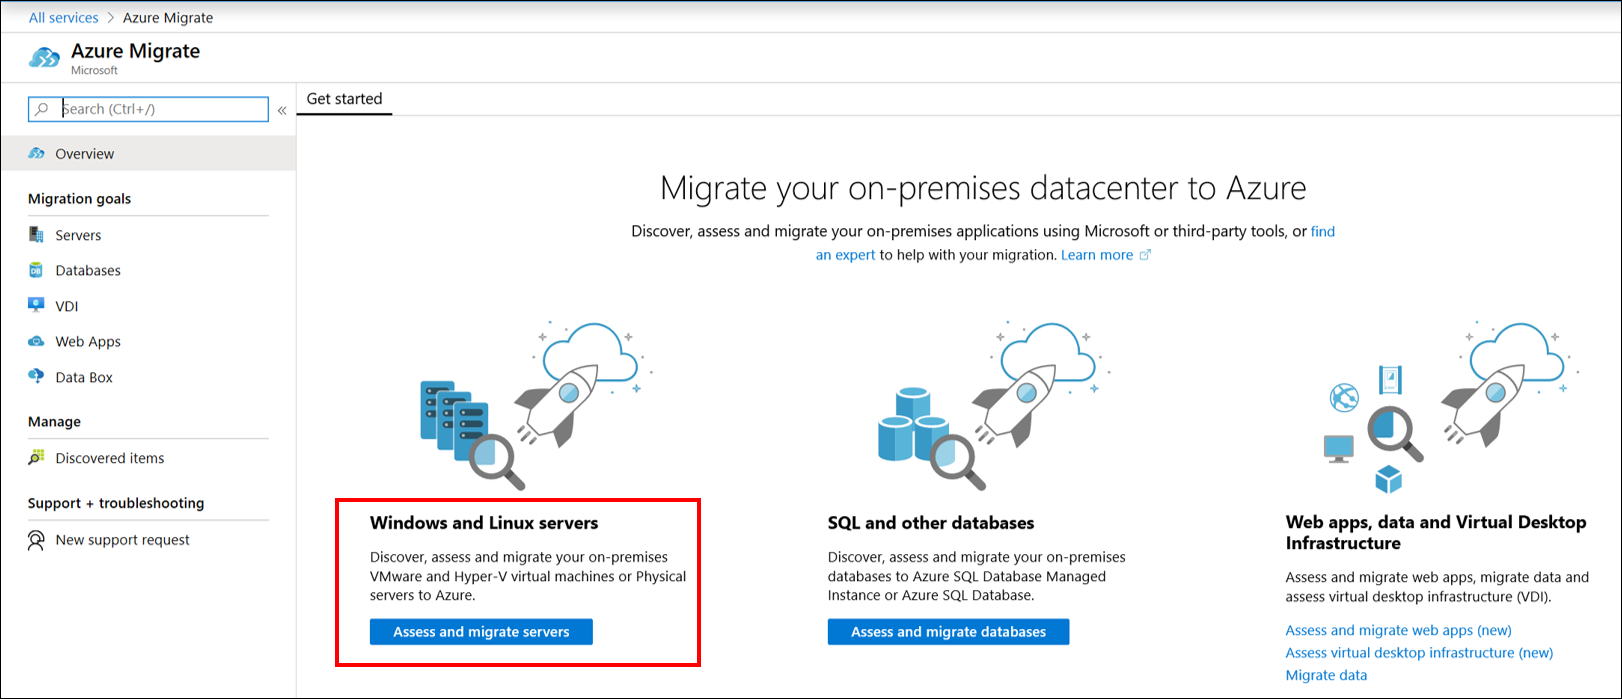 Screenshot of the Get Started page under Overview in an Azure Migrate project. The screenshot shows the available discovery, assessment and migration options in Azure Migrate. There are options are for servers, databases, web apps, and on-premises data. The Windows and Linux
servers option is highlighted with a red border, and displays a blue button with the label Assess and migrate servers.